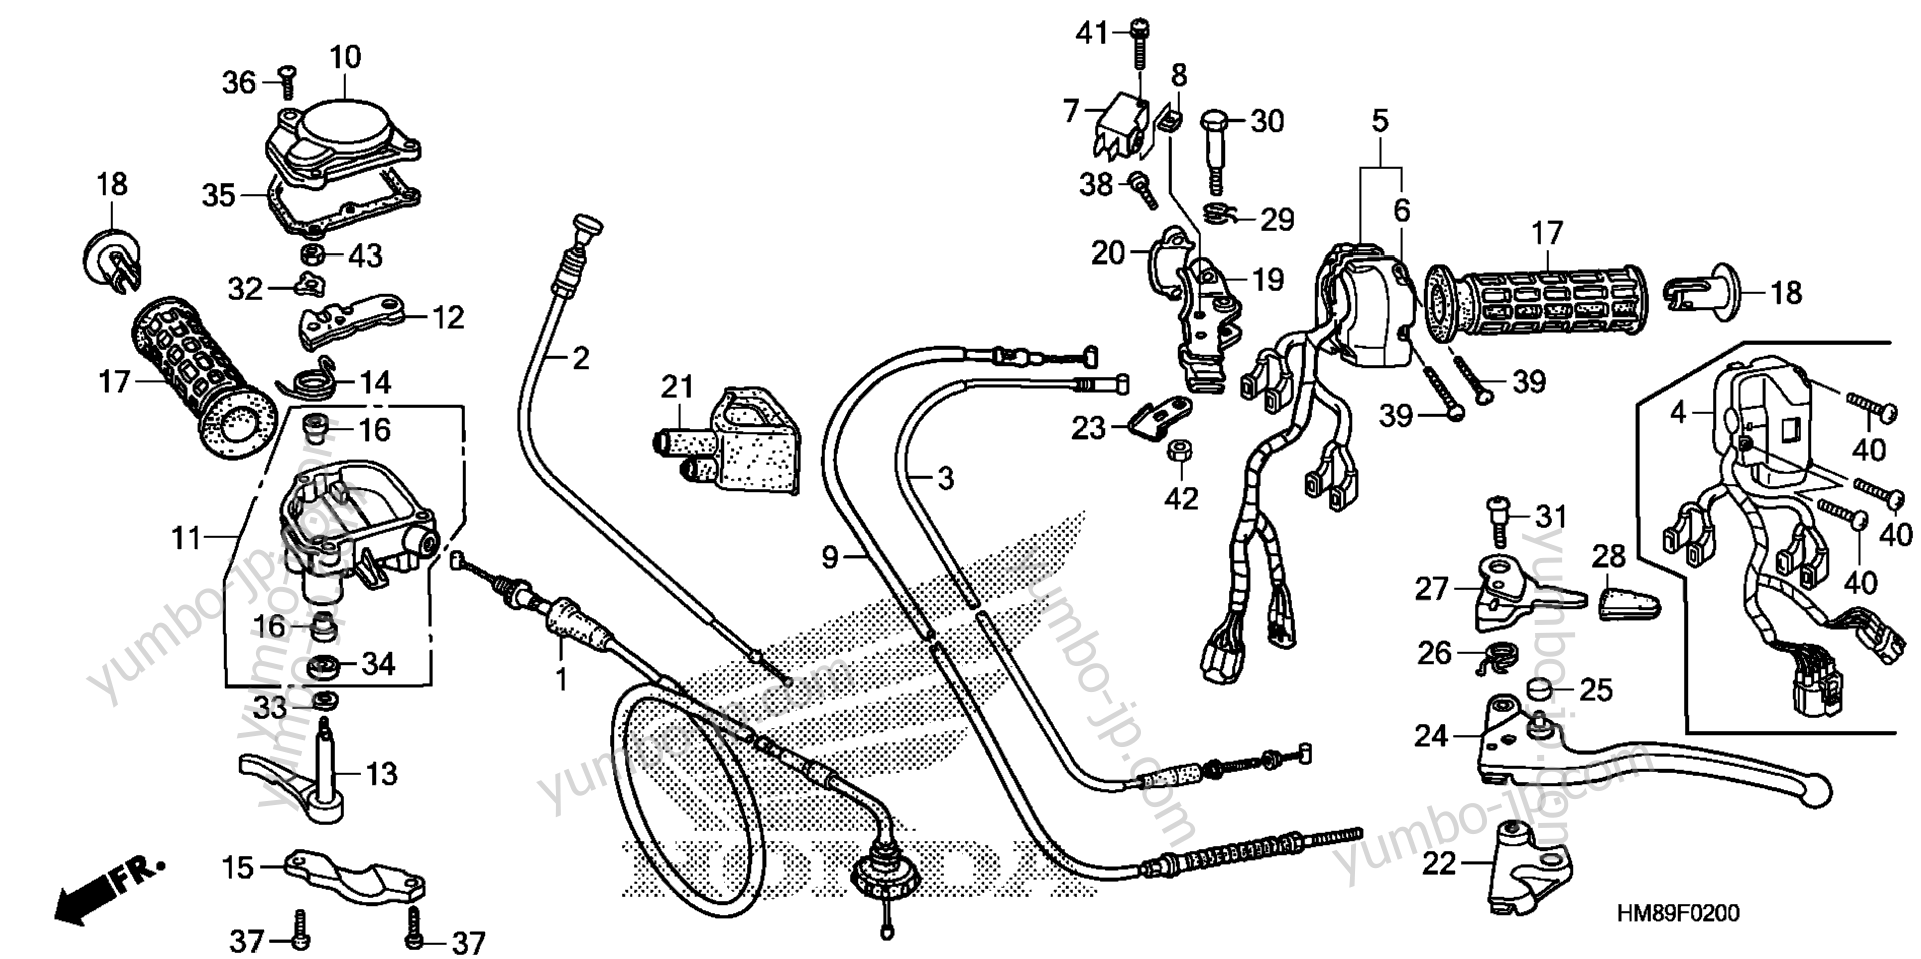 HANDLE LEVER / SWITCH / CABLE for ATVs HONDA TRX250TE A 2012 year